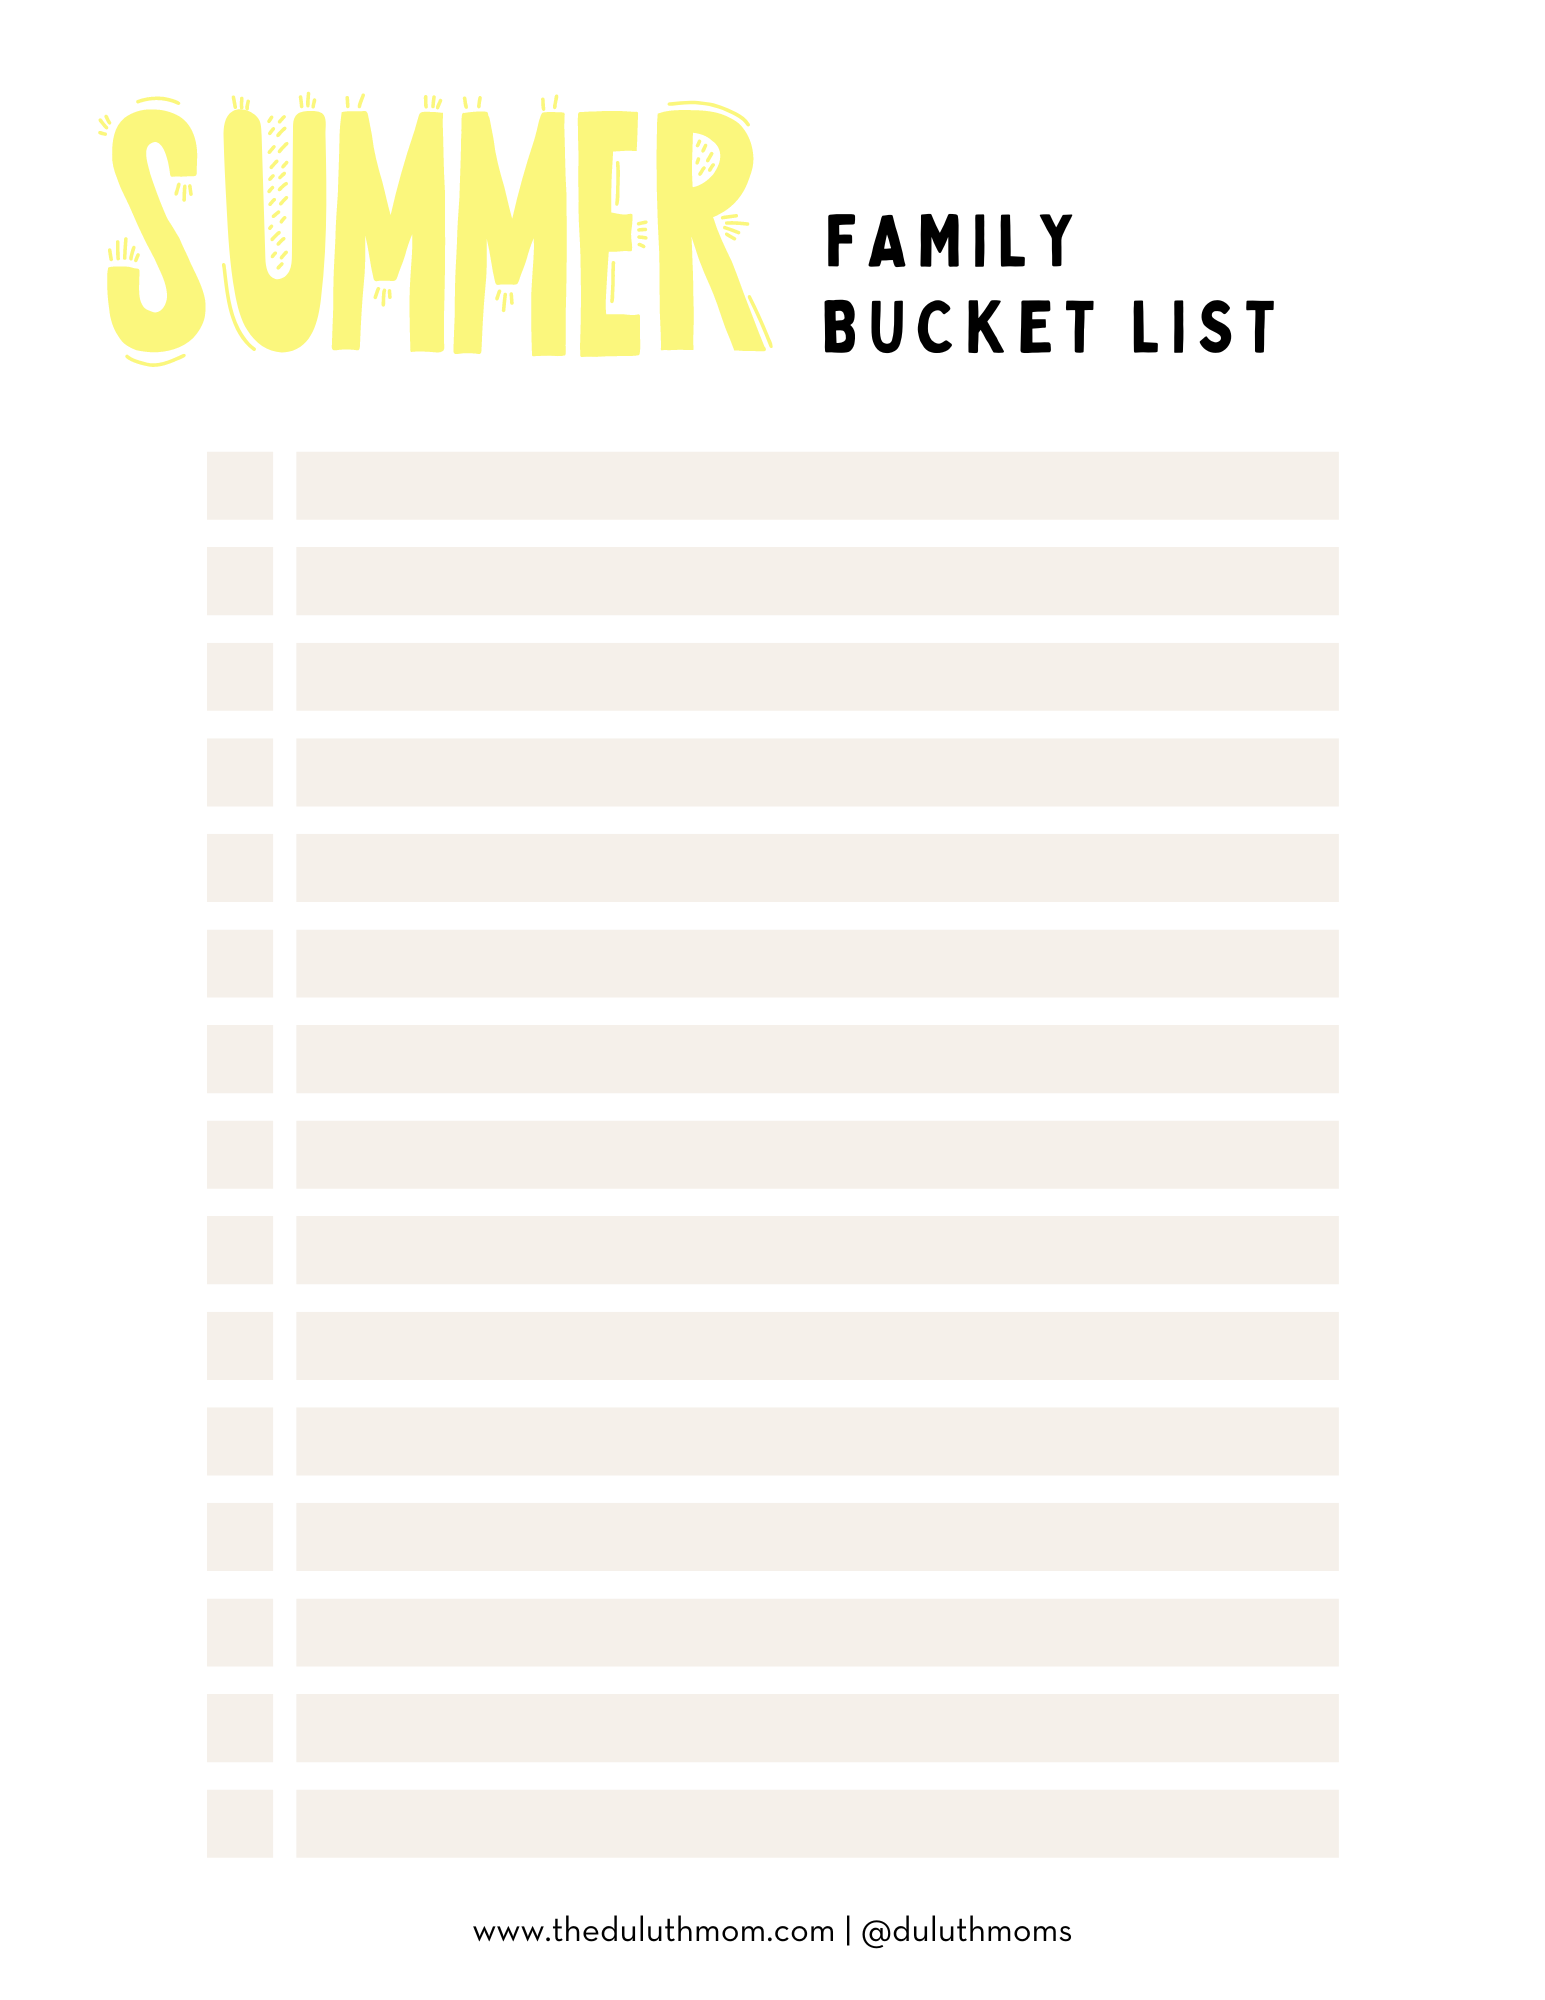 A Summer Family Bucket List Printable for planning your summer